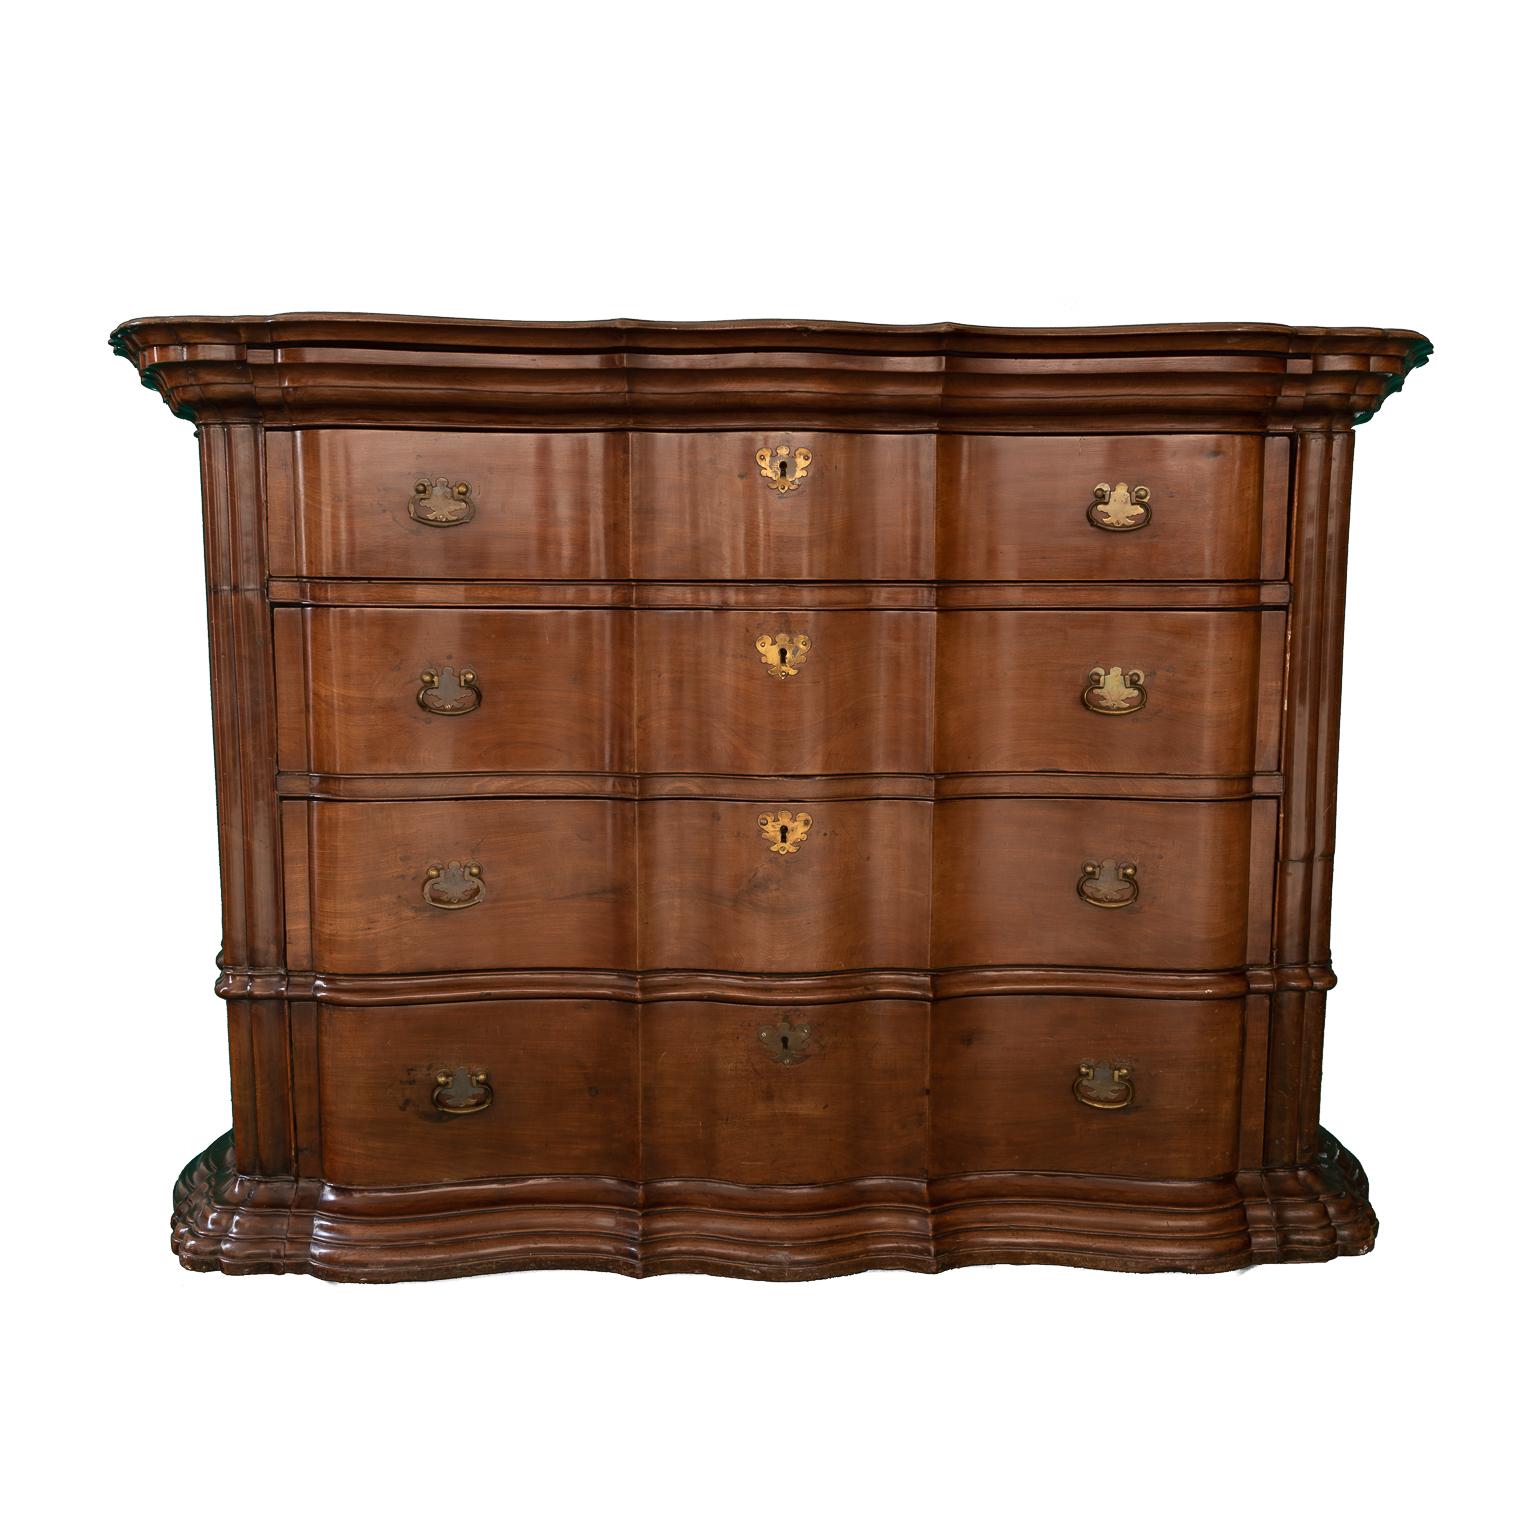 Comfortable chest of drawers in Chippendale style
A rare combination of excellent quality, the state of conservation is intact. Original surface, gloriously patinated over time